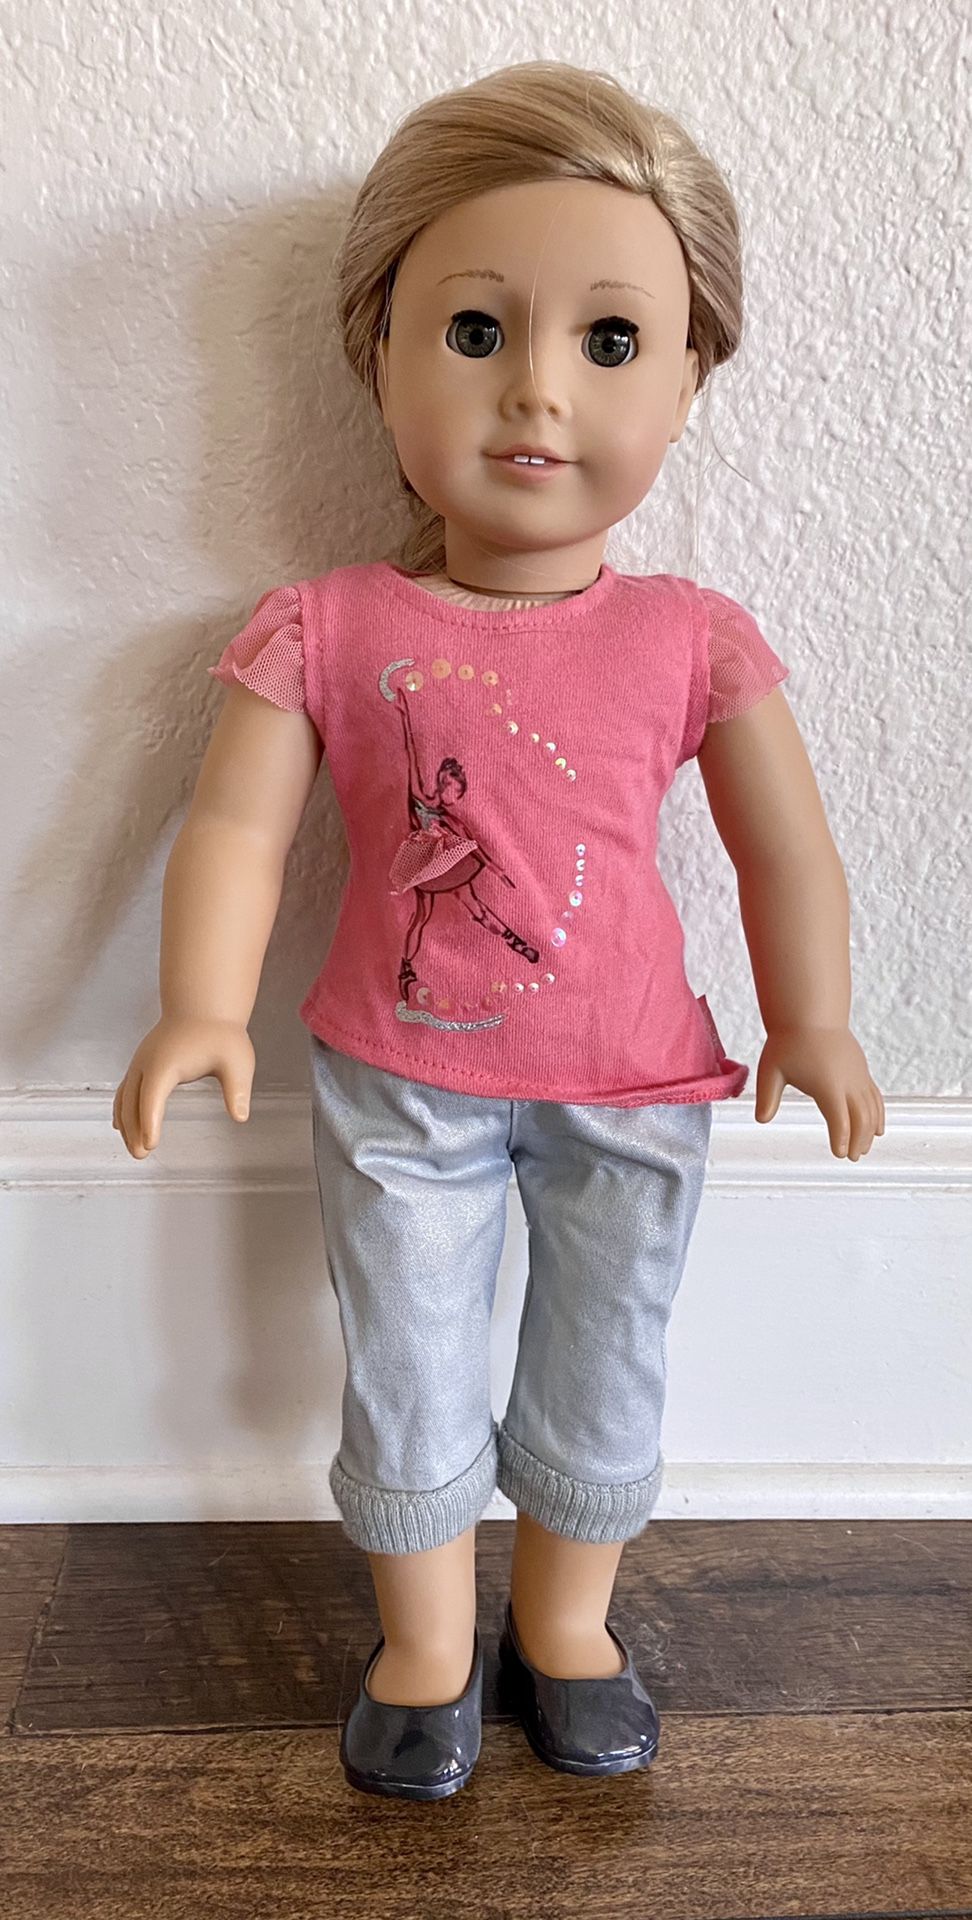 Isabelle American Girl Doll, cat & outfits